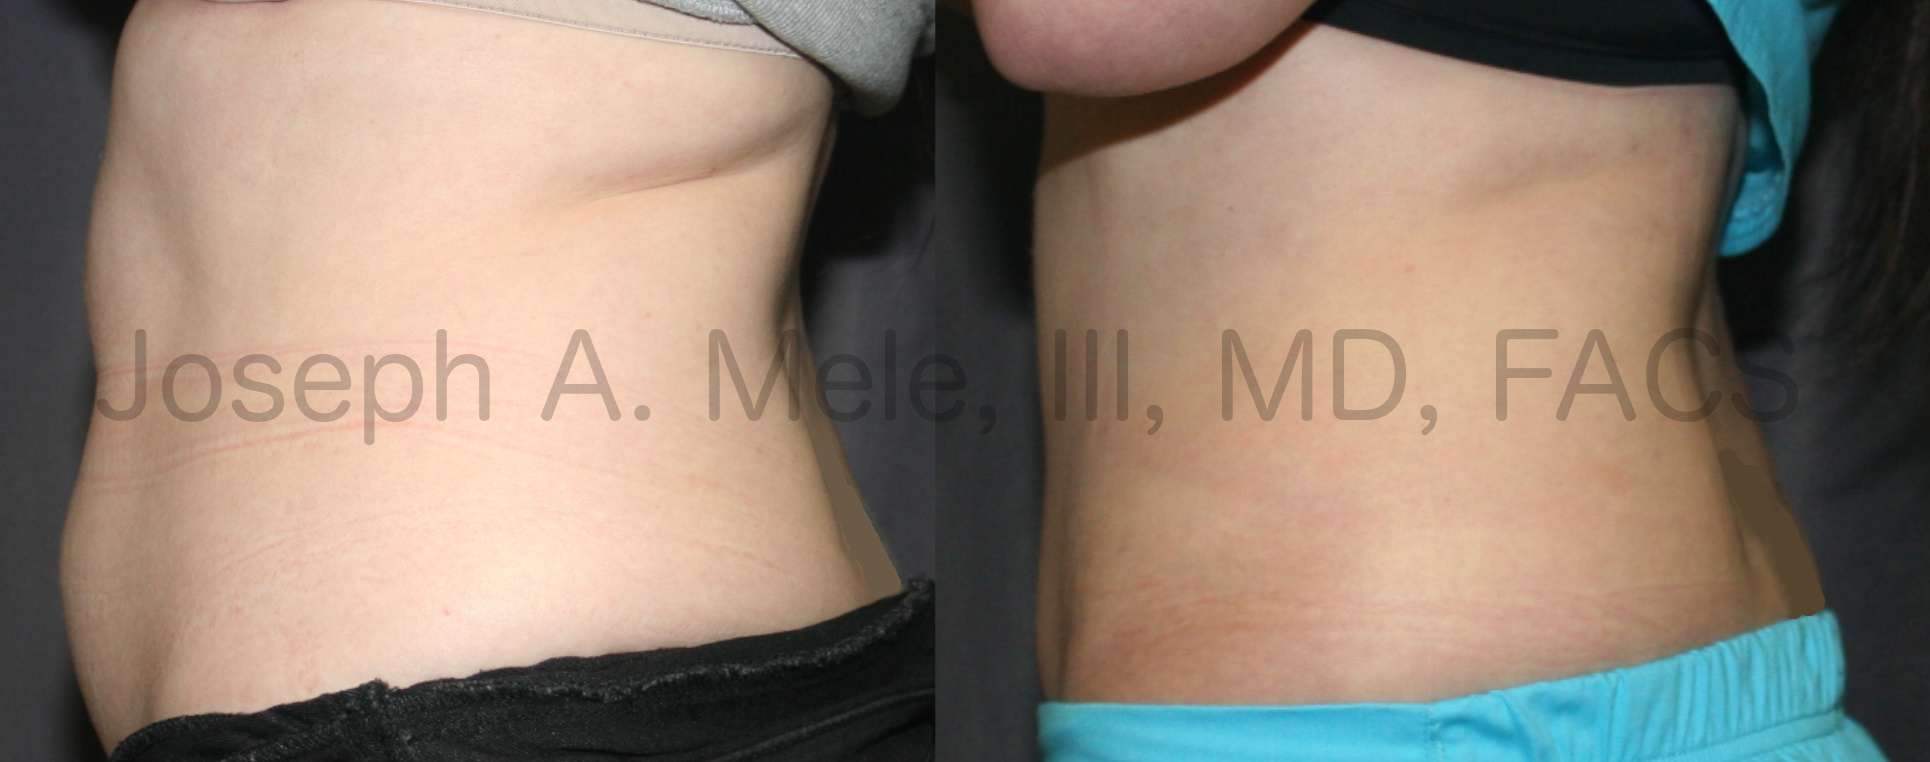 Abdominal Liposuction before and after photos Liposculpture